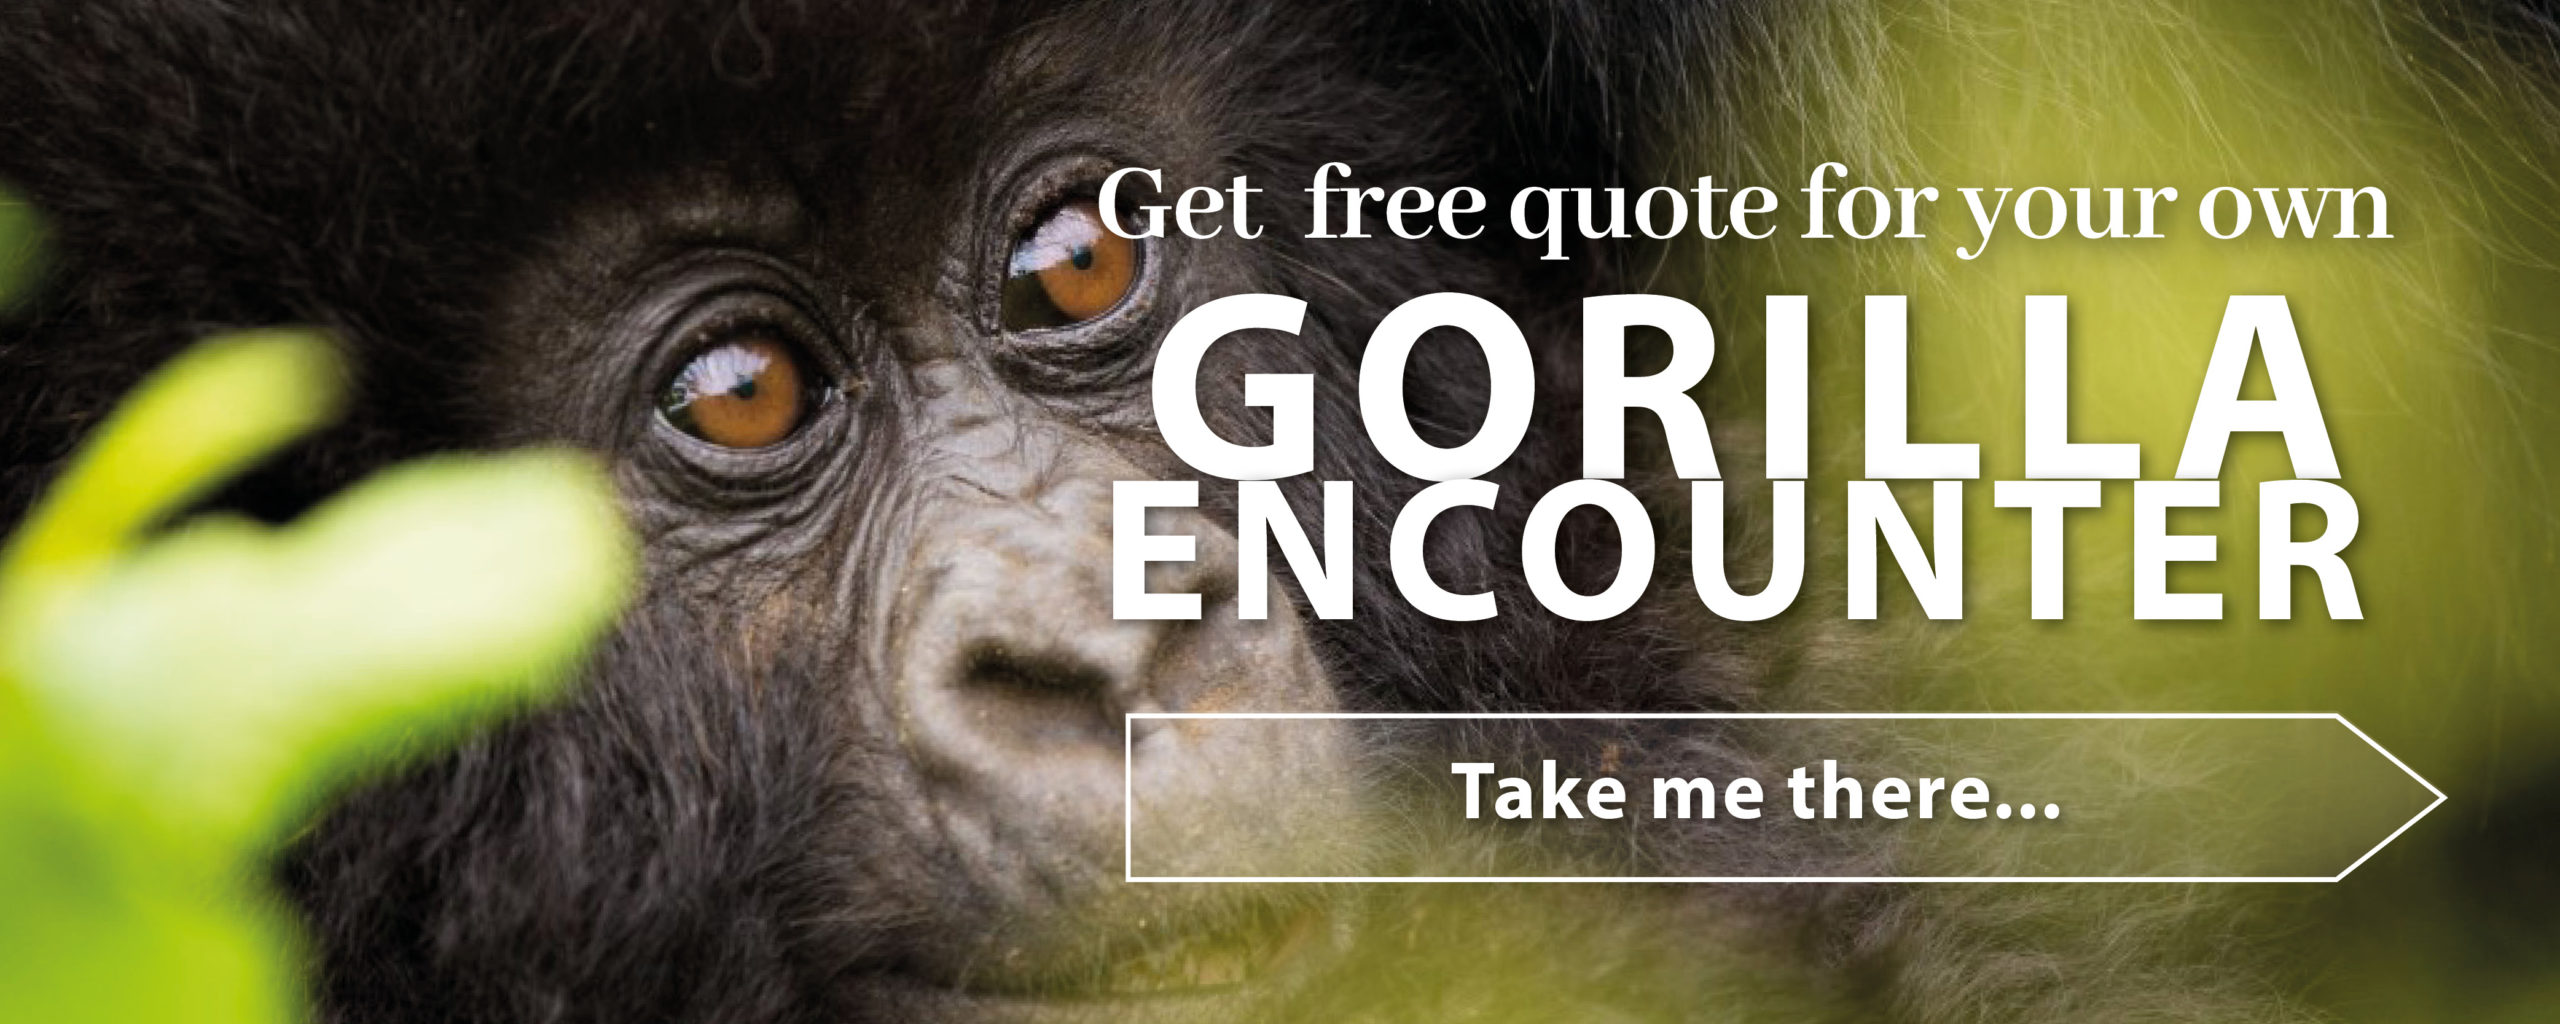 Get a quote for gorilla trekking in Uganda holiday